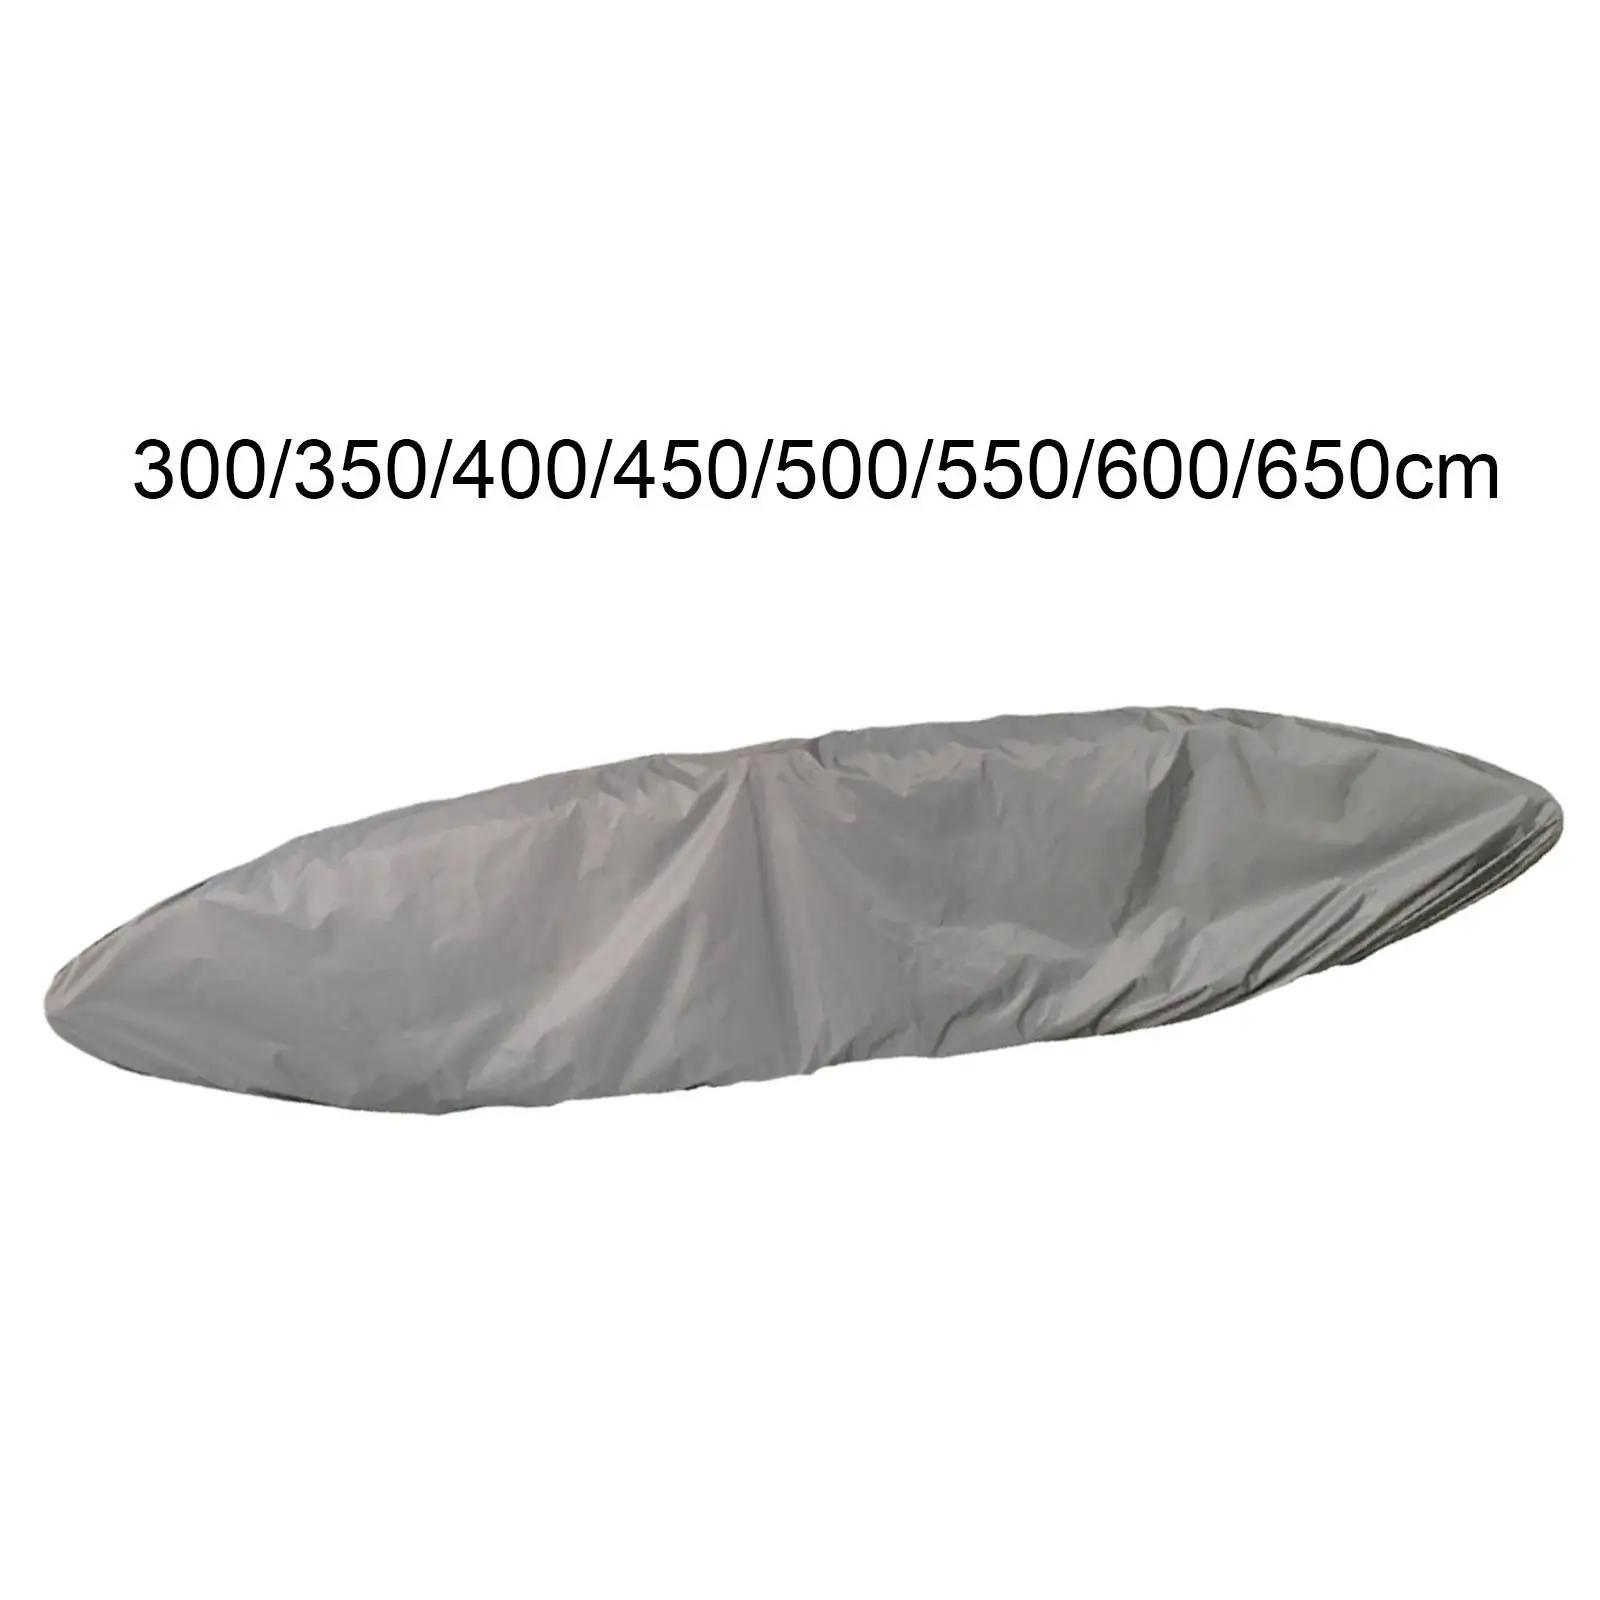 Canoe Cover Dustproof Transport Protector Boat Parts Boat Storage Cover Waterproof Kayak Cover for Kayaking Drifting Boating